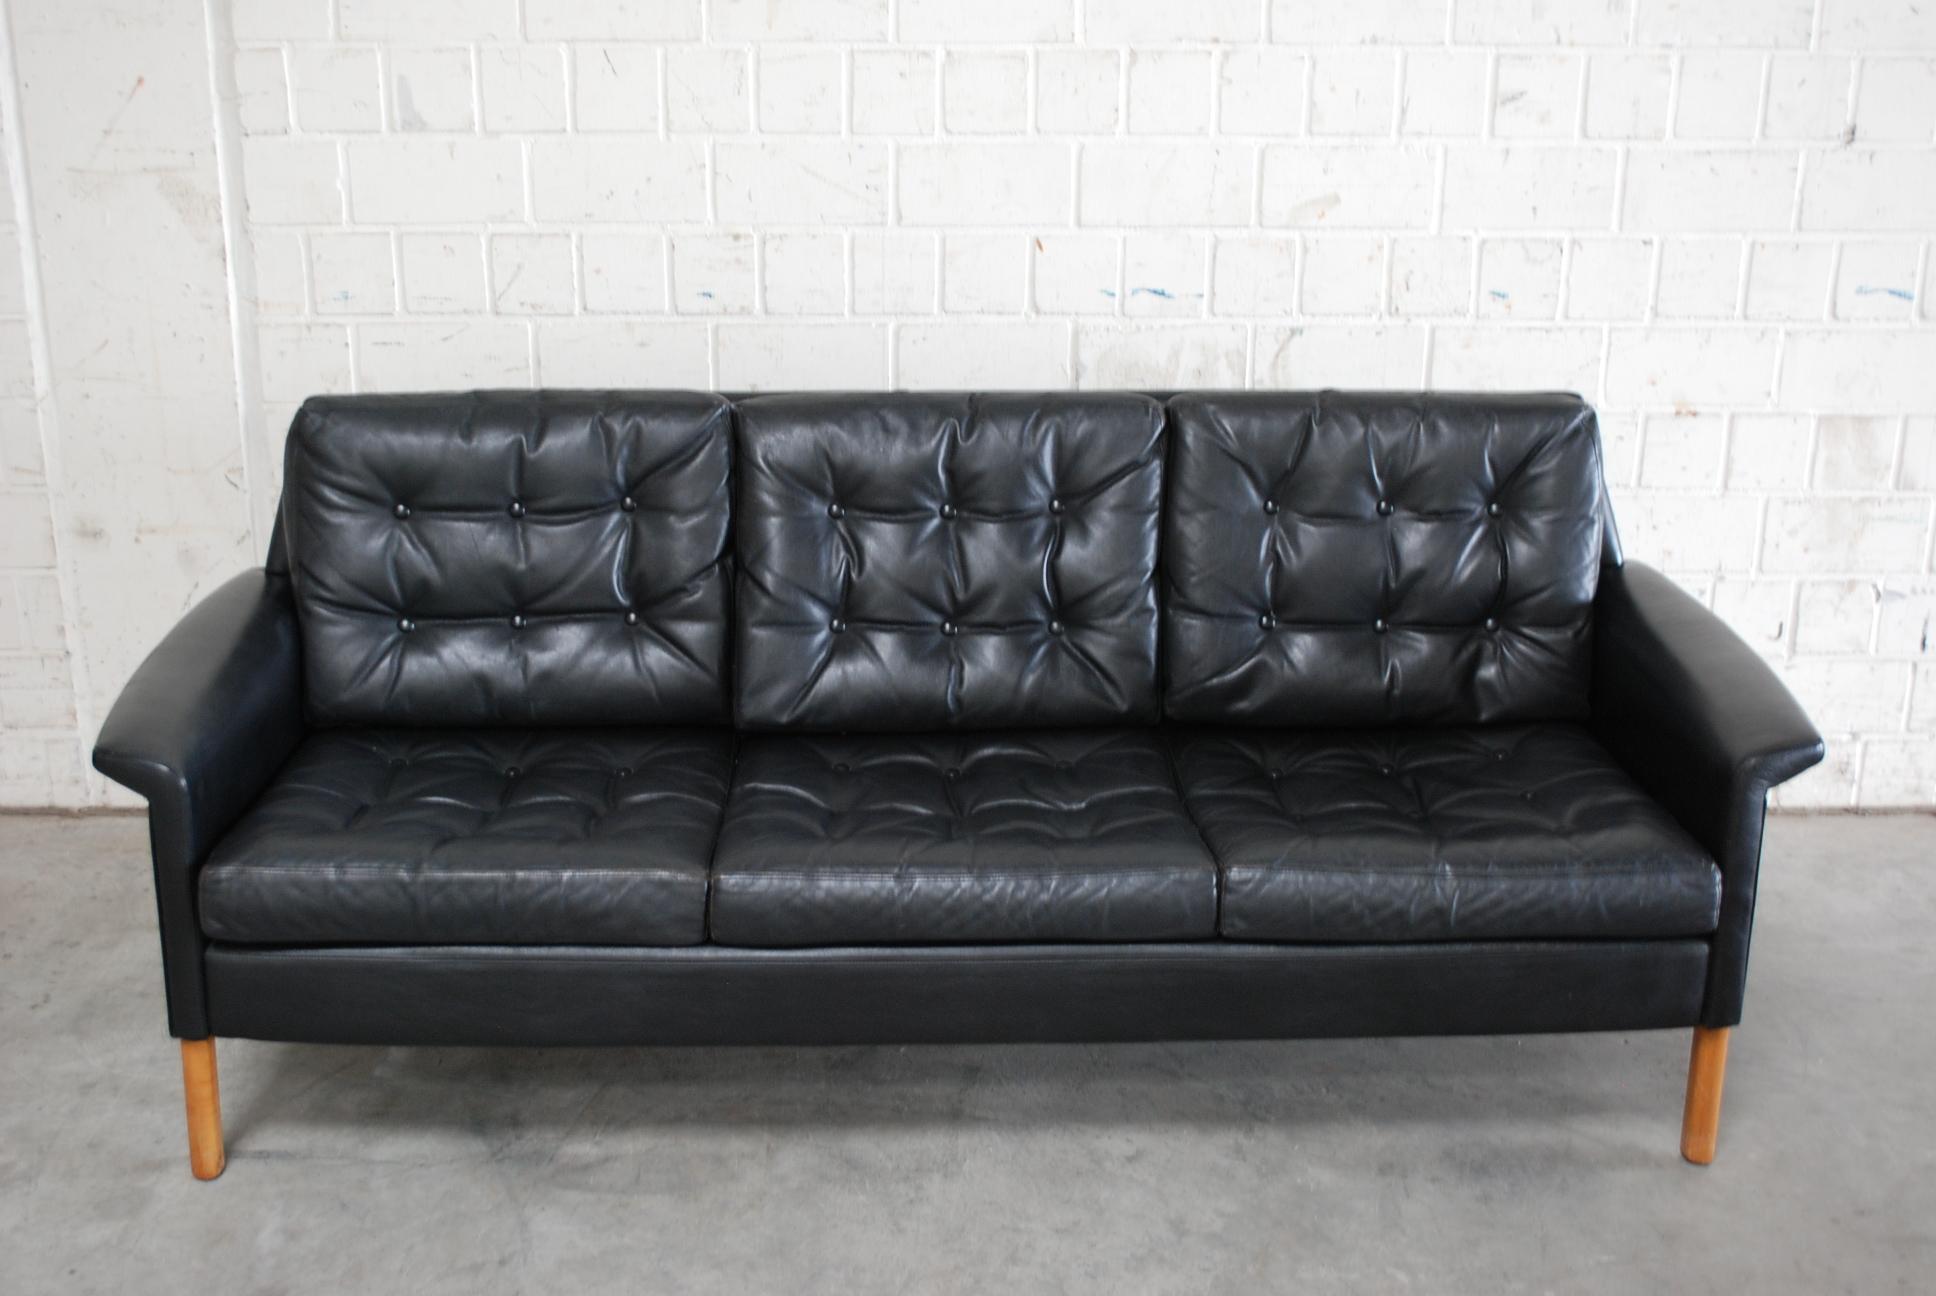 Black leather sofa by Rudolf Glatzel manufactured by German manufacture Kill International.
Great design from the 1960s.
We also have 2 armchairs that fits well to this sofa.